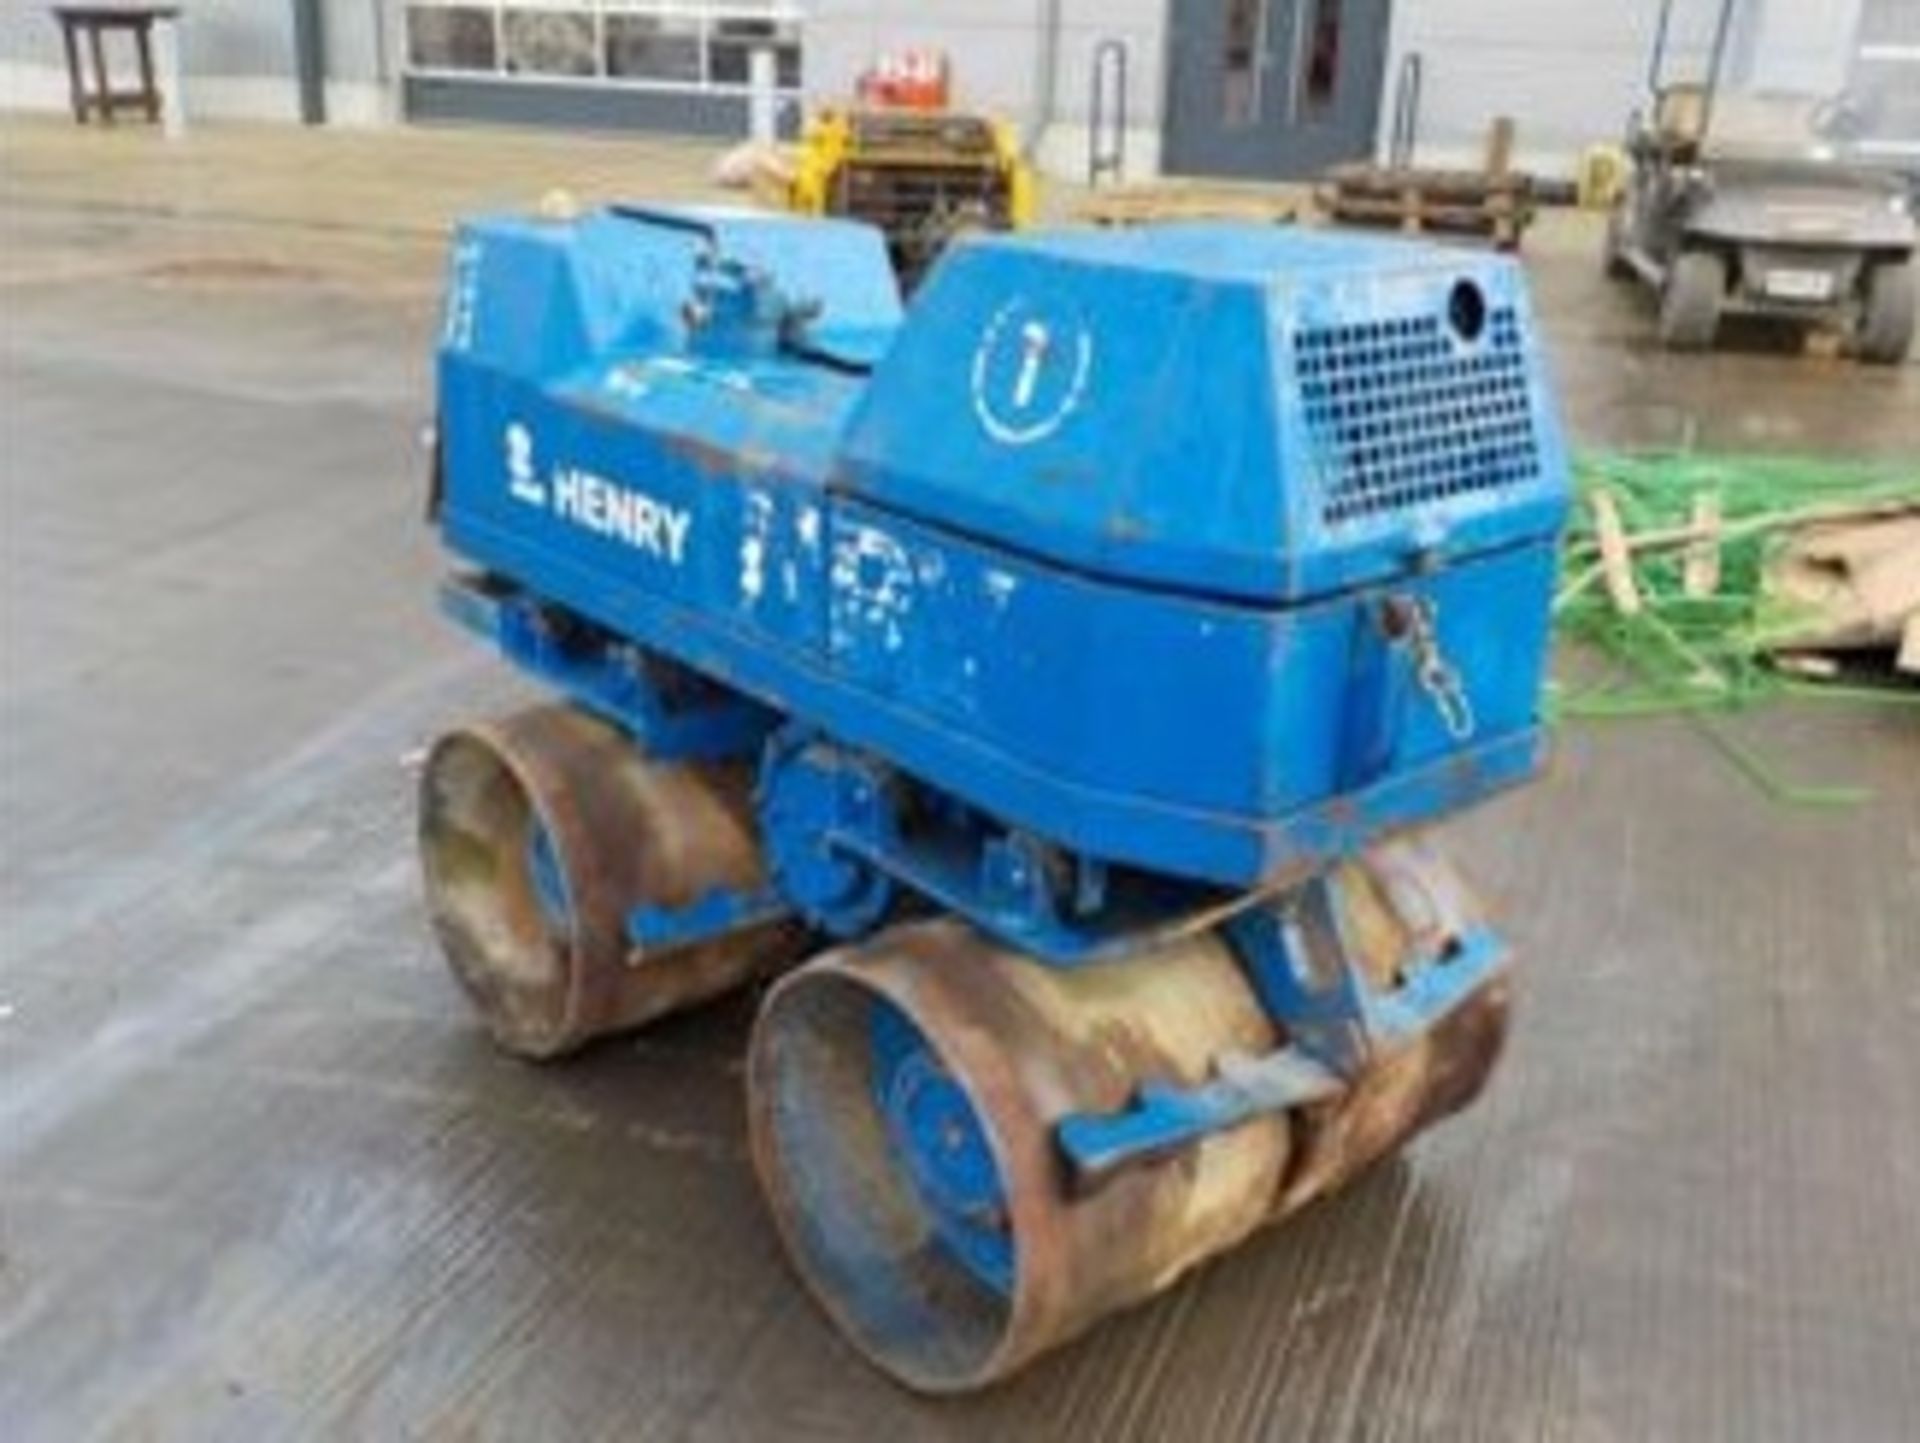 HATZ TWIN DRUM REMOTE CONTROL TRENCHER, DELIVERY ANYWHERE UK £175 *PLUS VAT* - Image 3 of 9